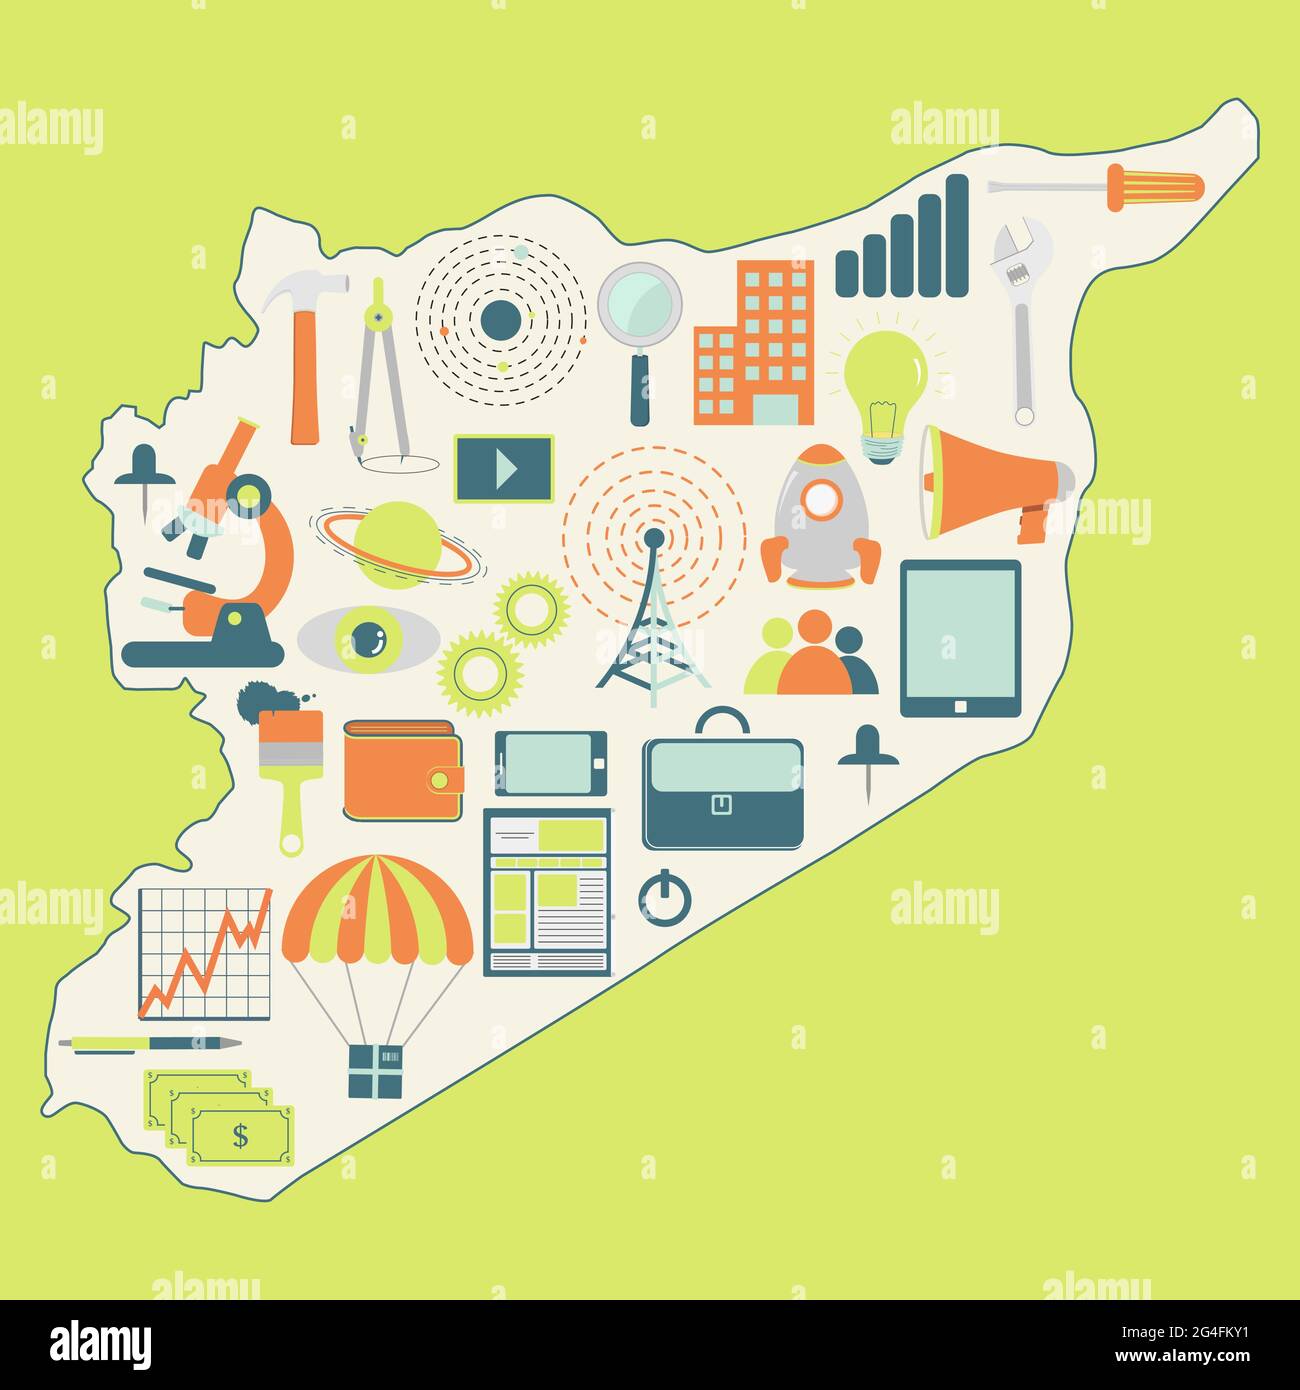 Contour map of Syria with icons of technology, business, science, communication Stock Vector